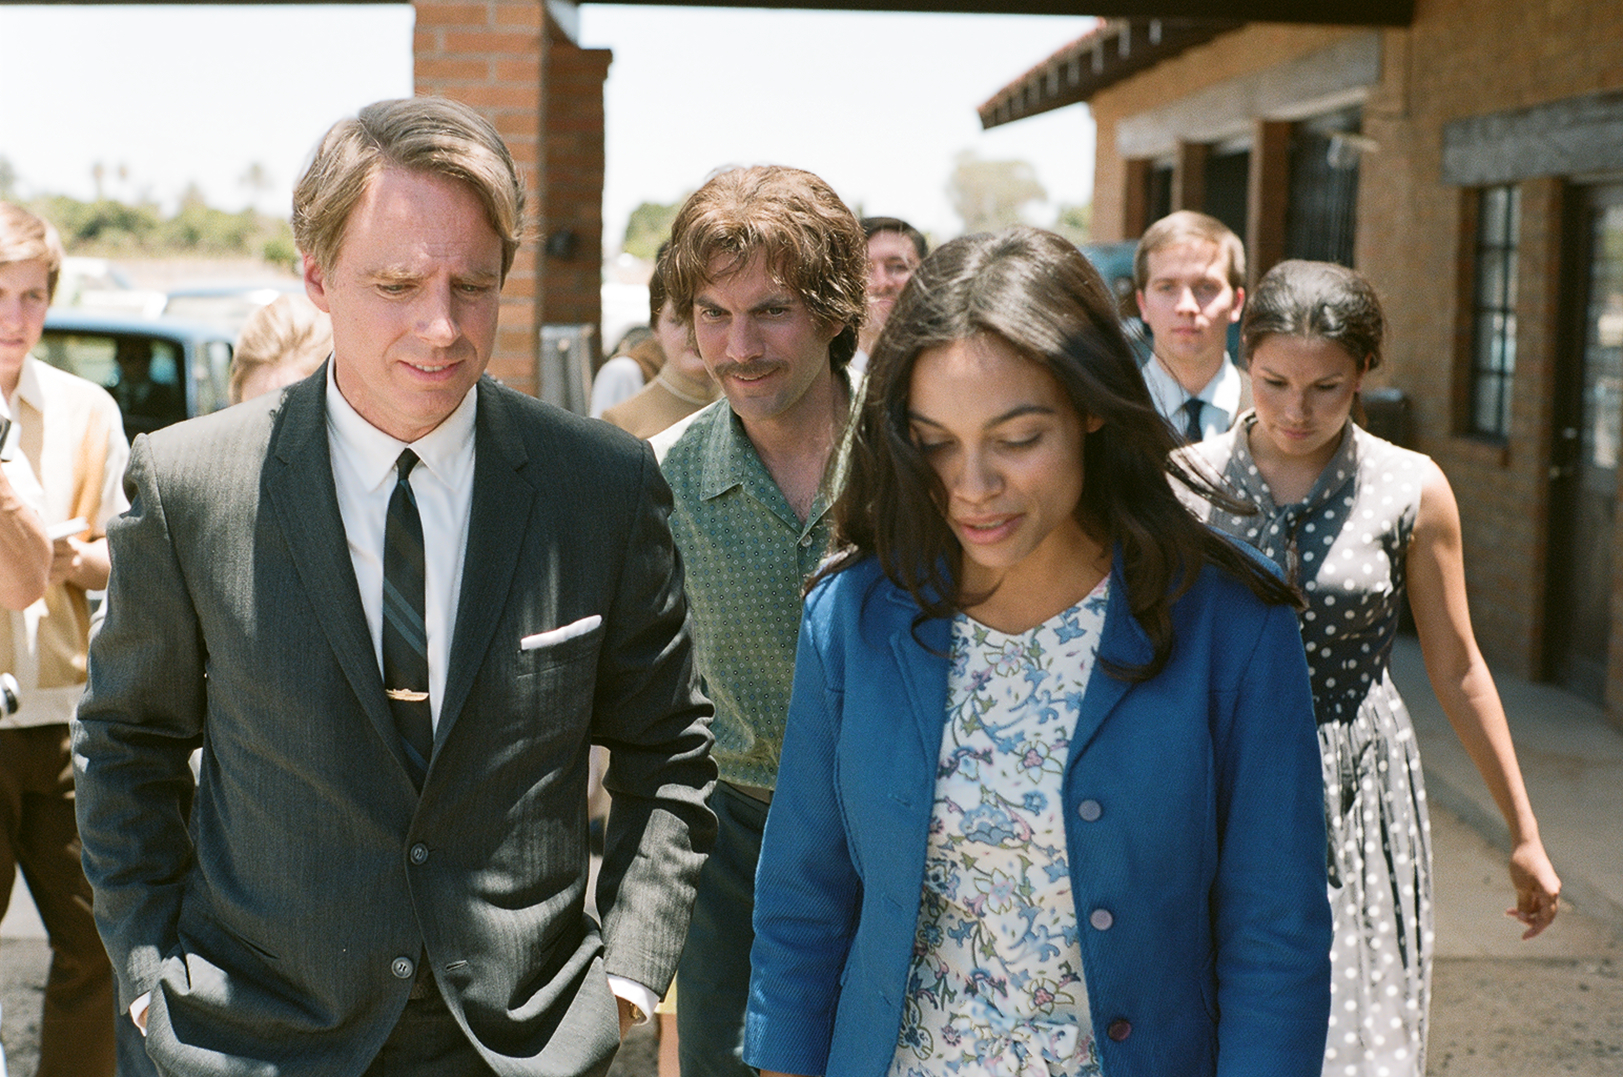 RFK in CHAVEZ: Jack Holmes as Sen. Robert F. Kennedy walks with Rosario Dawson as Dolores Huerta, Wes Bentley as Jerry Cohen walks behind, in 